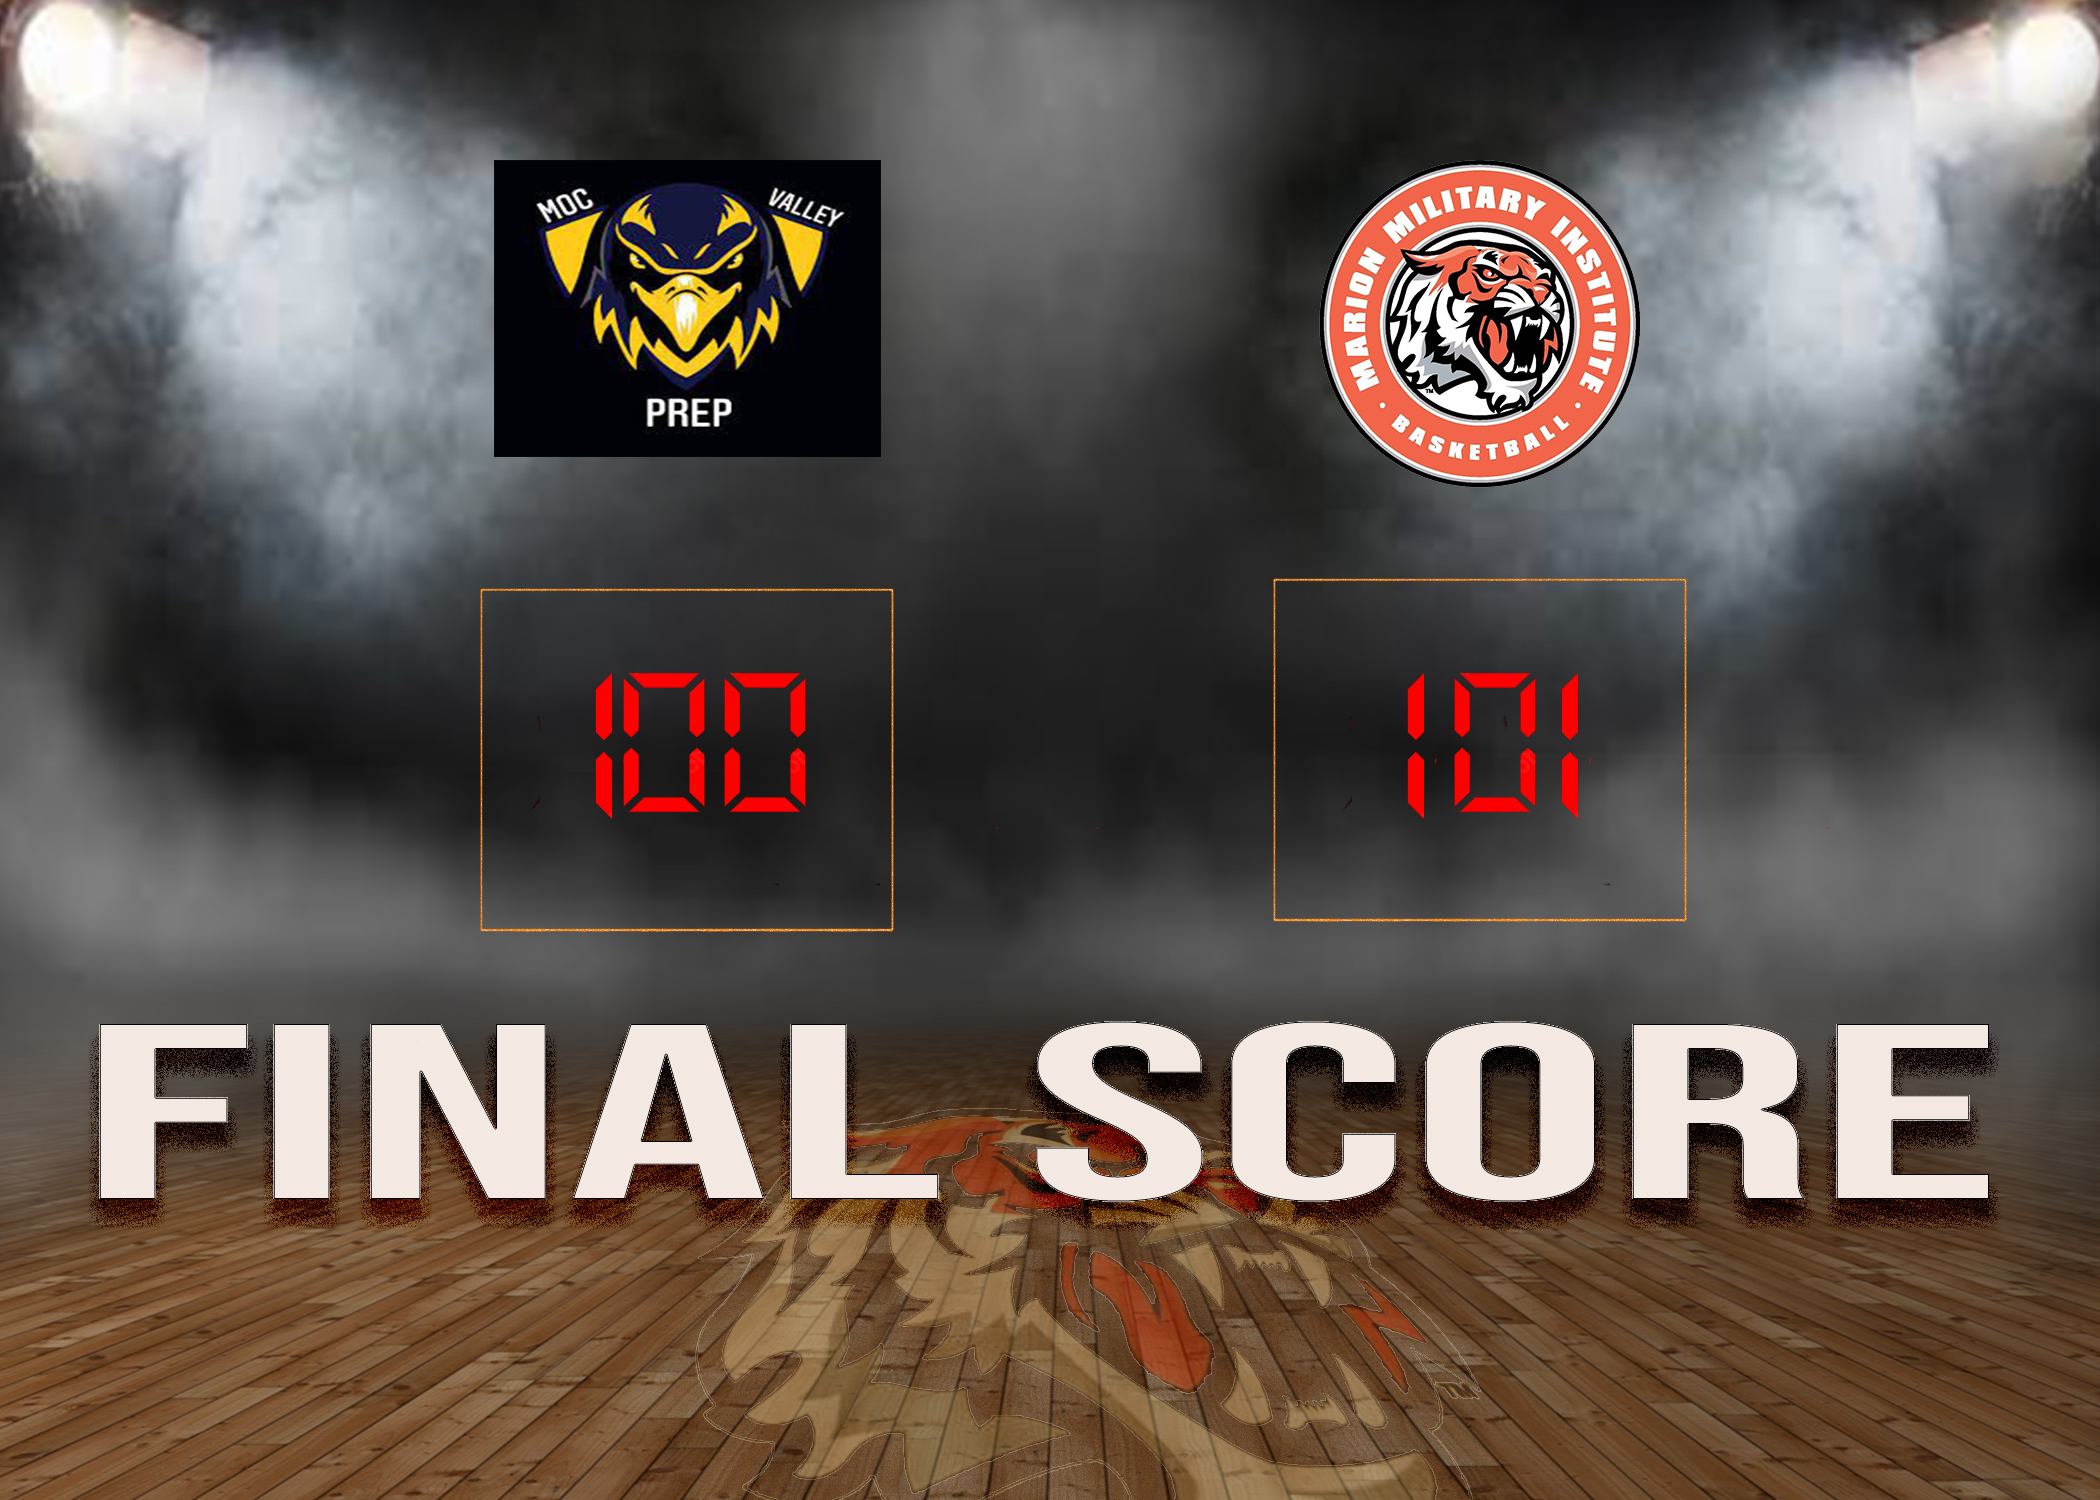 Cham and Wright Lead Tigers to Comeback Win